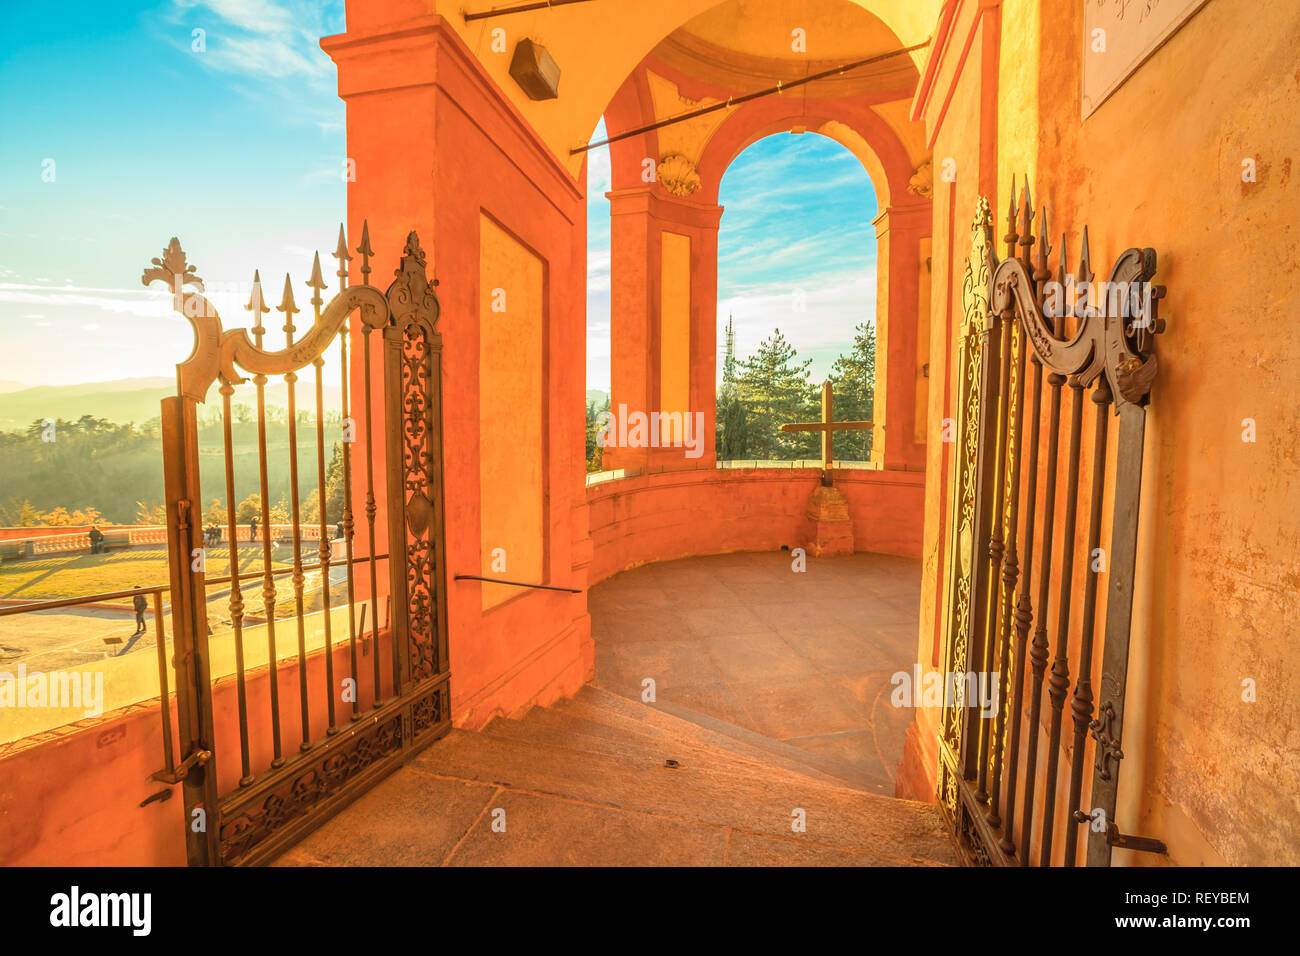 Entrance gate between the portico and the Sanctuary of San Luca. Famous place of Marian worship on the Colle della Guardia in Bologna, Emilia Romagna, Italy. Stock Photo